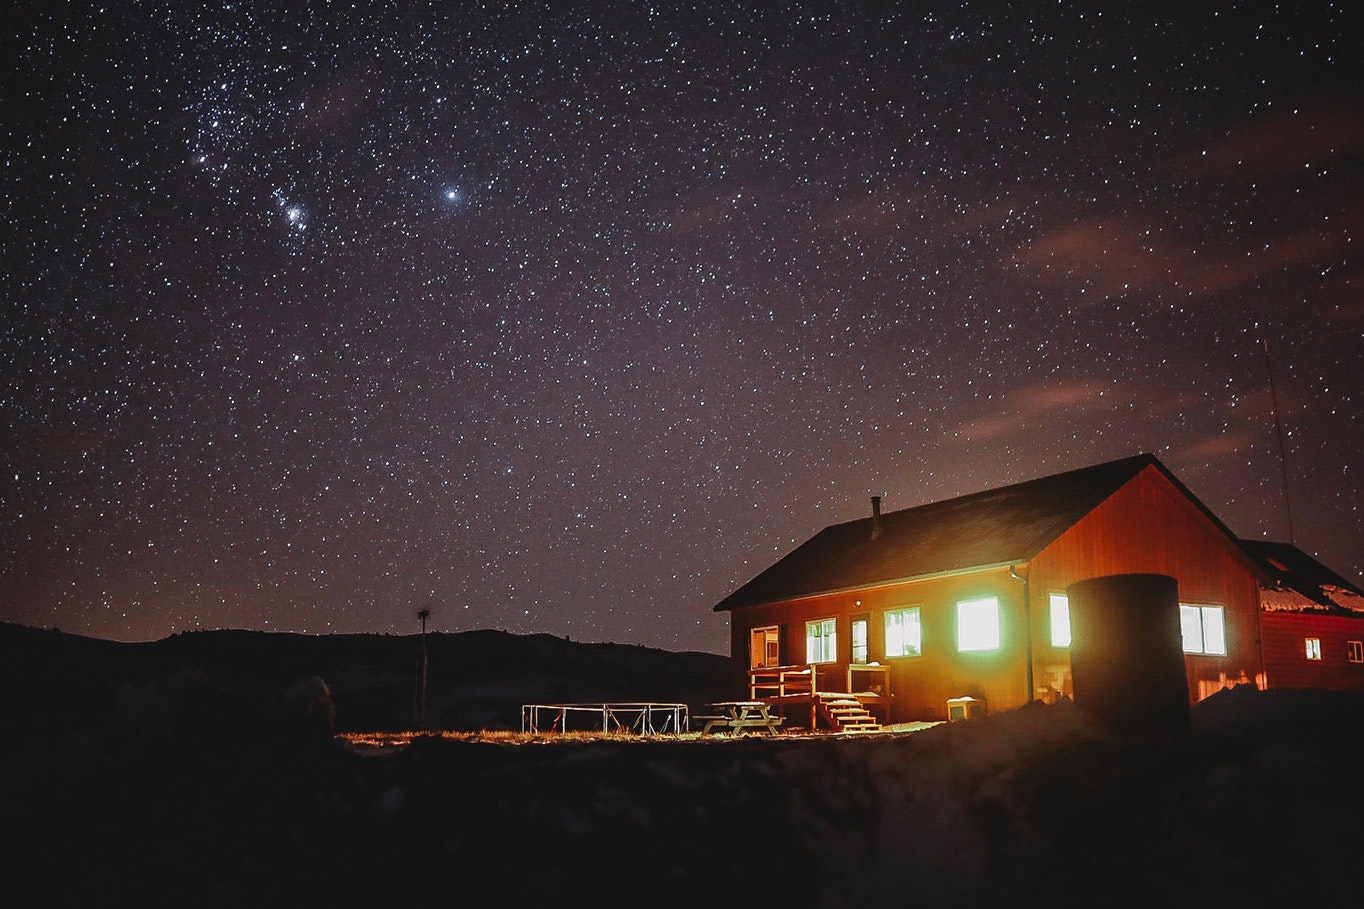 Josh Winkler’s off-grid cabin in remote Lincoln County on a clear winter night.